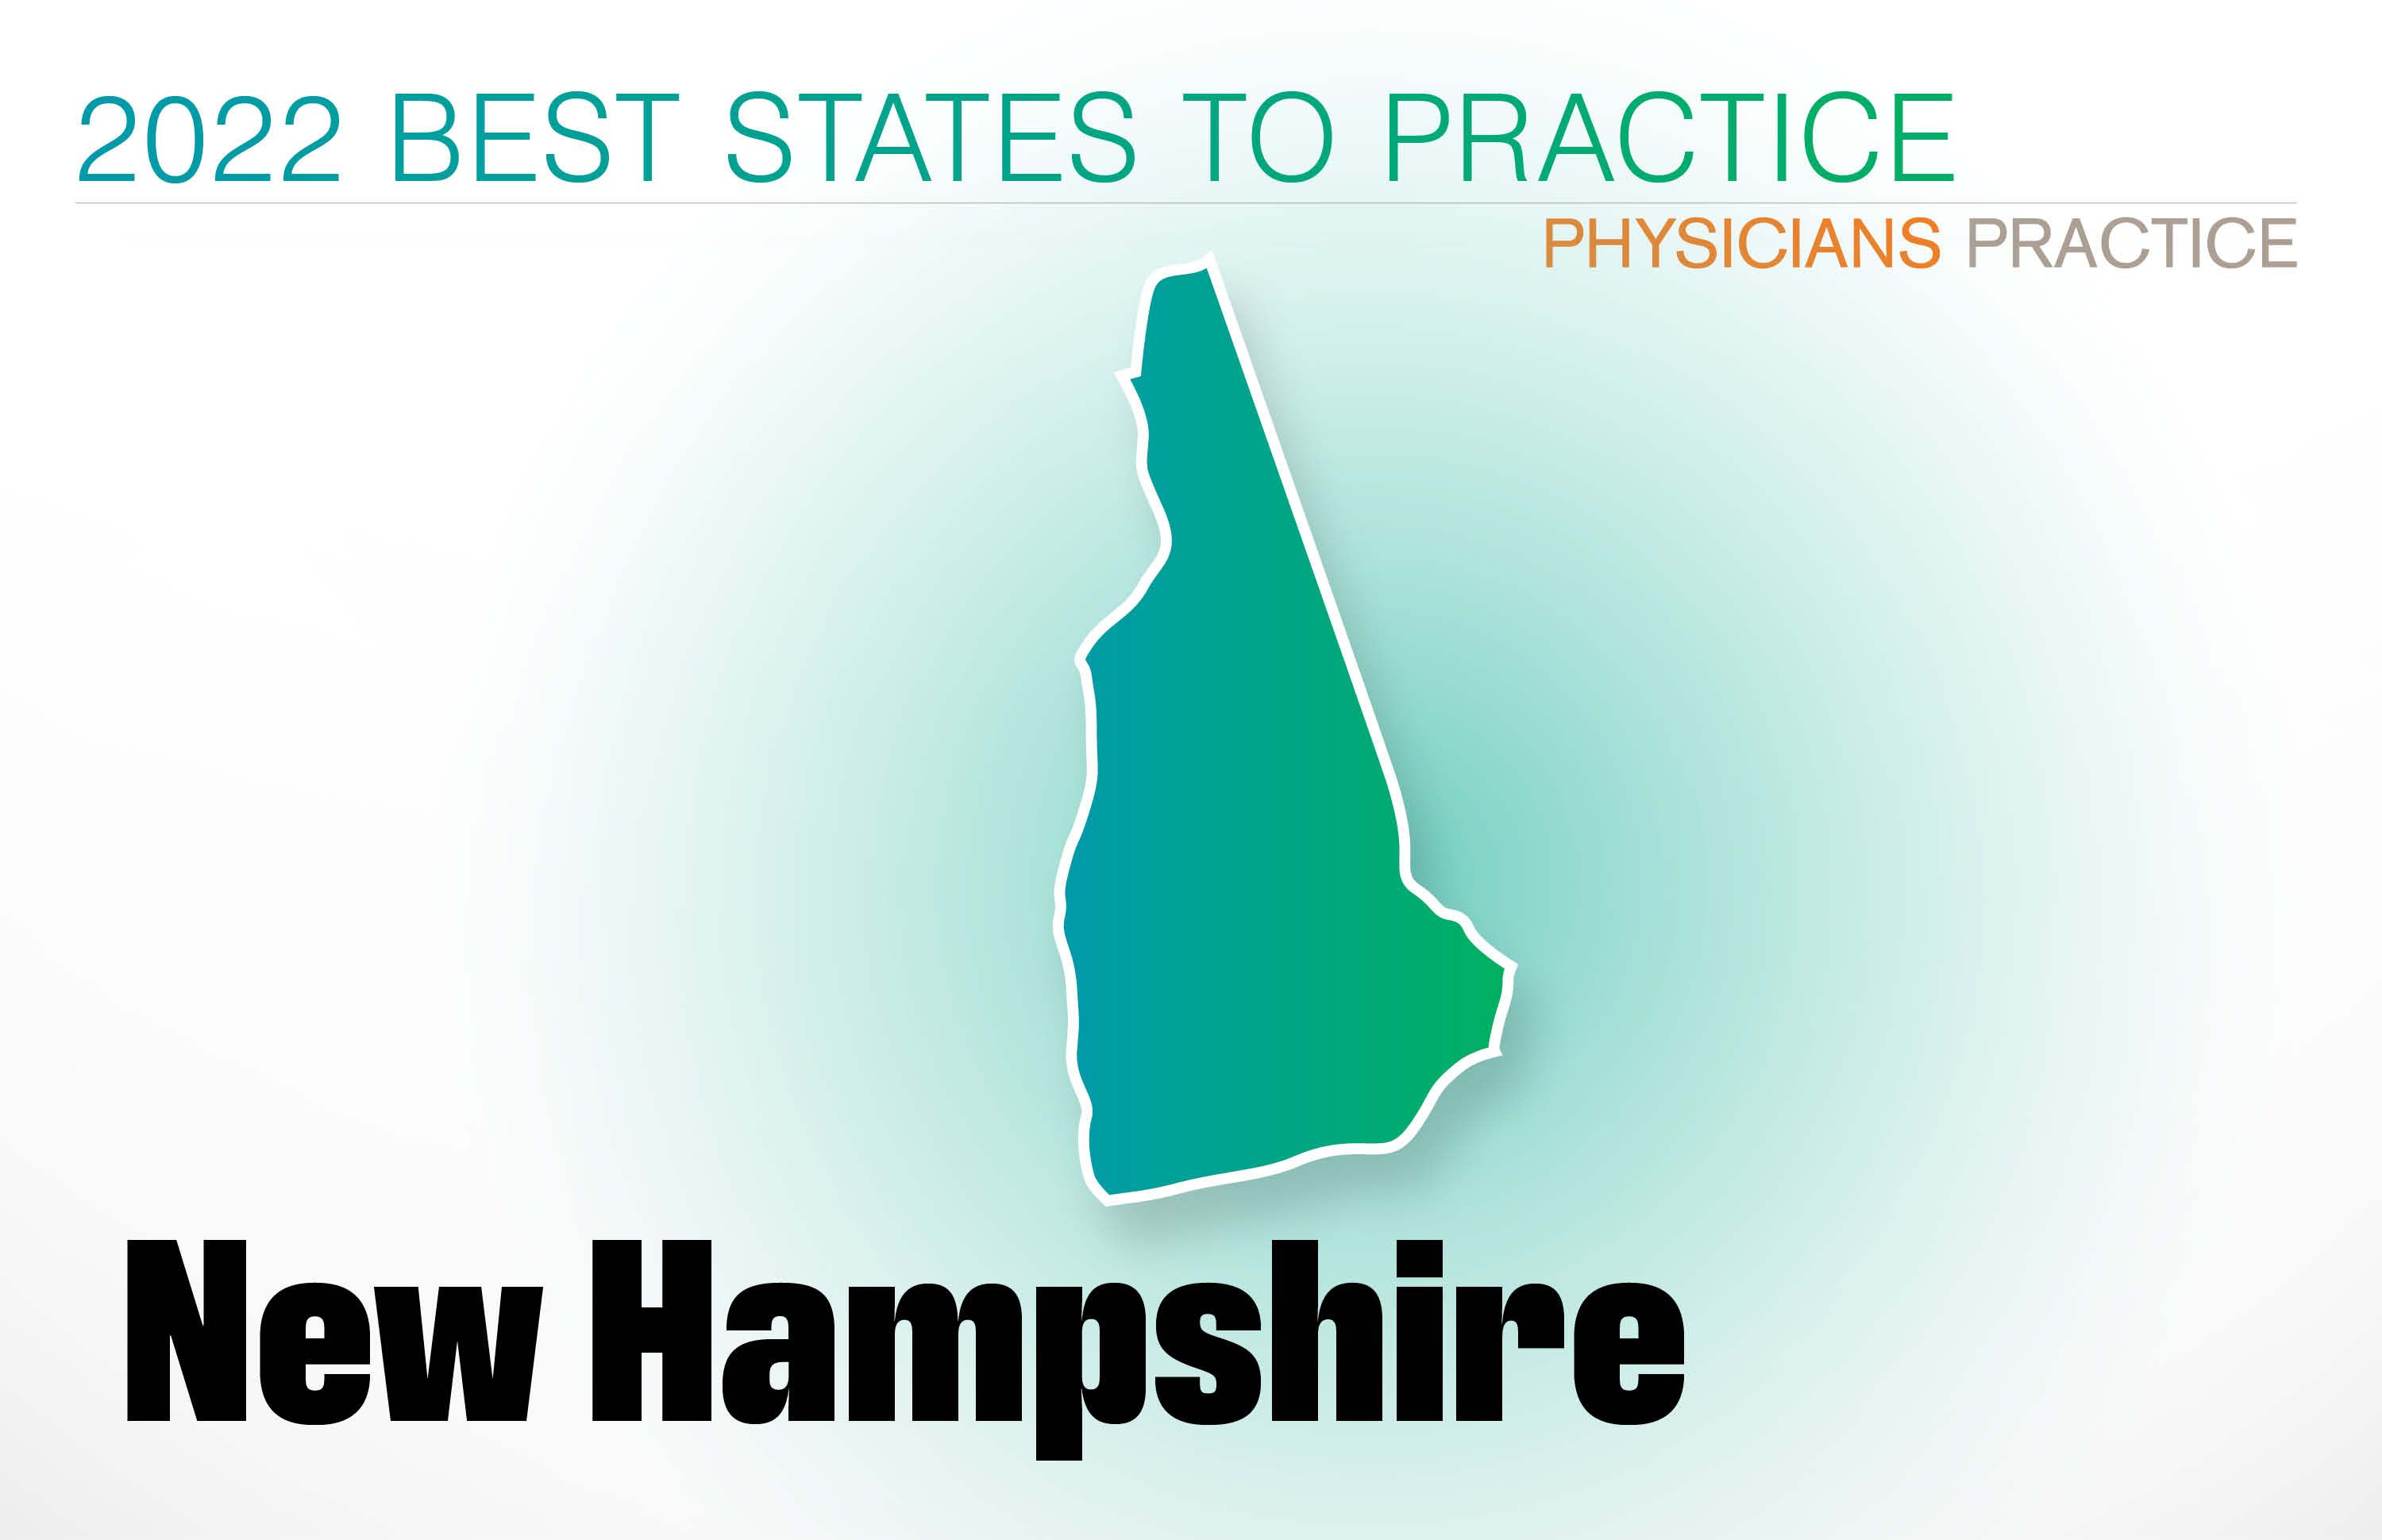 #30 New Hampshire Rankings: Cost of living: 42 Physician density: 42 Amount of state business taxes collected: 6 Average malpractice insurance rates: 36 Quality of life: 9 GPCI: 33